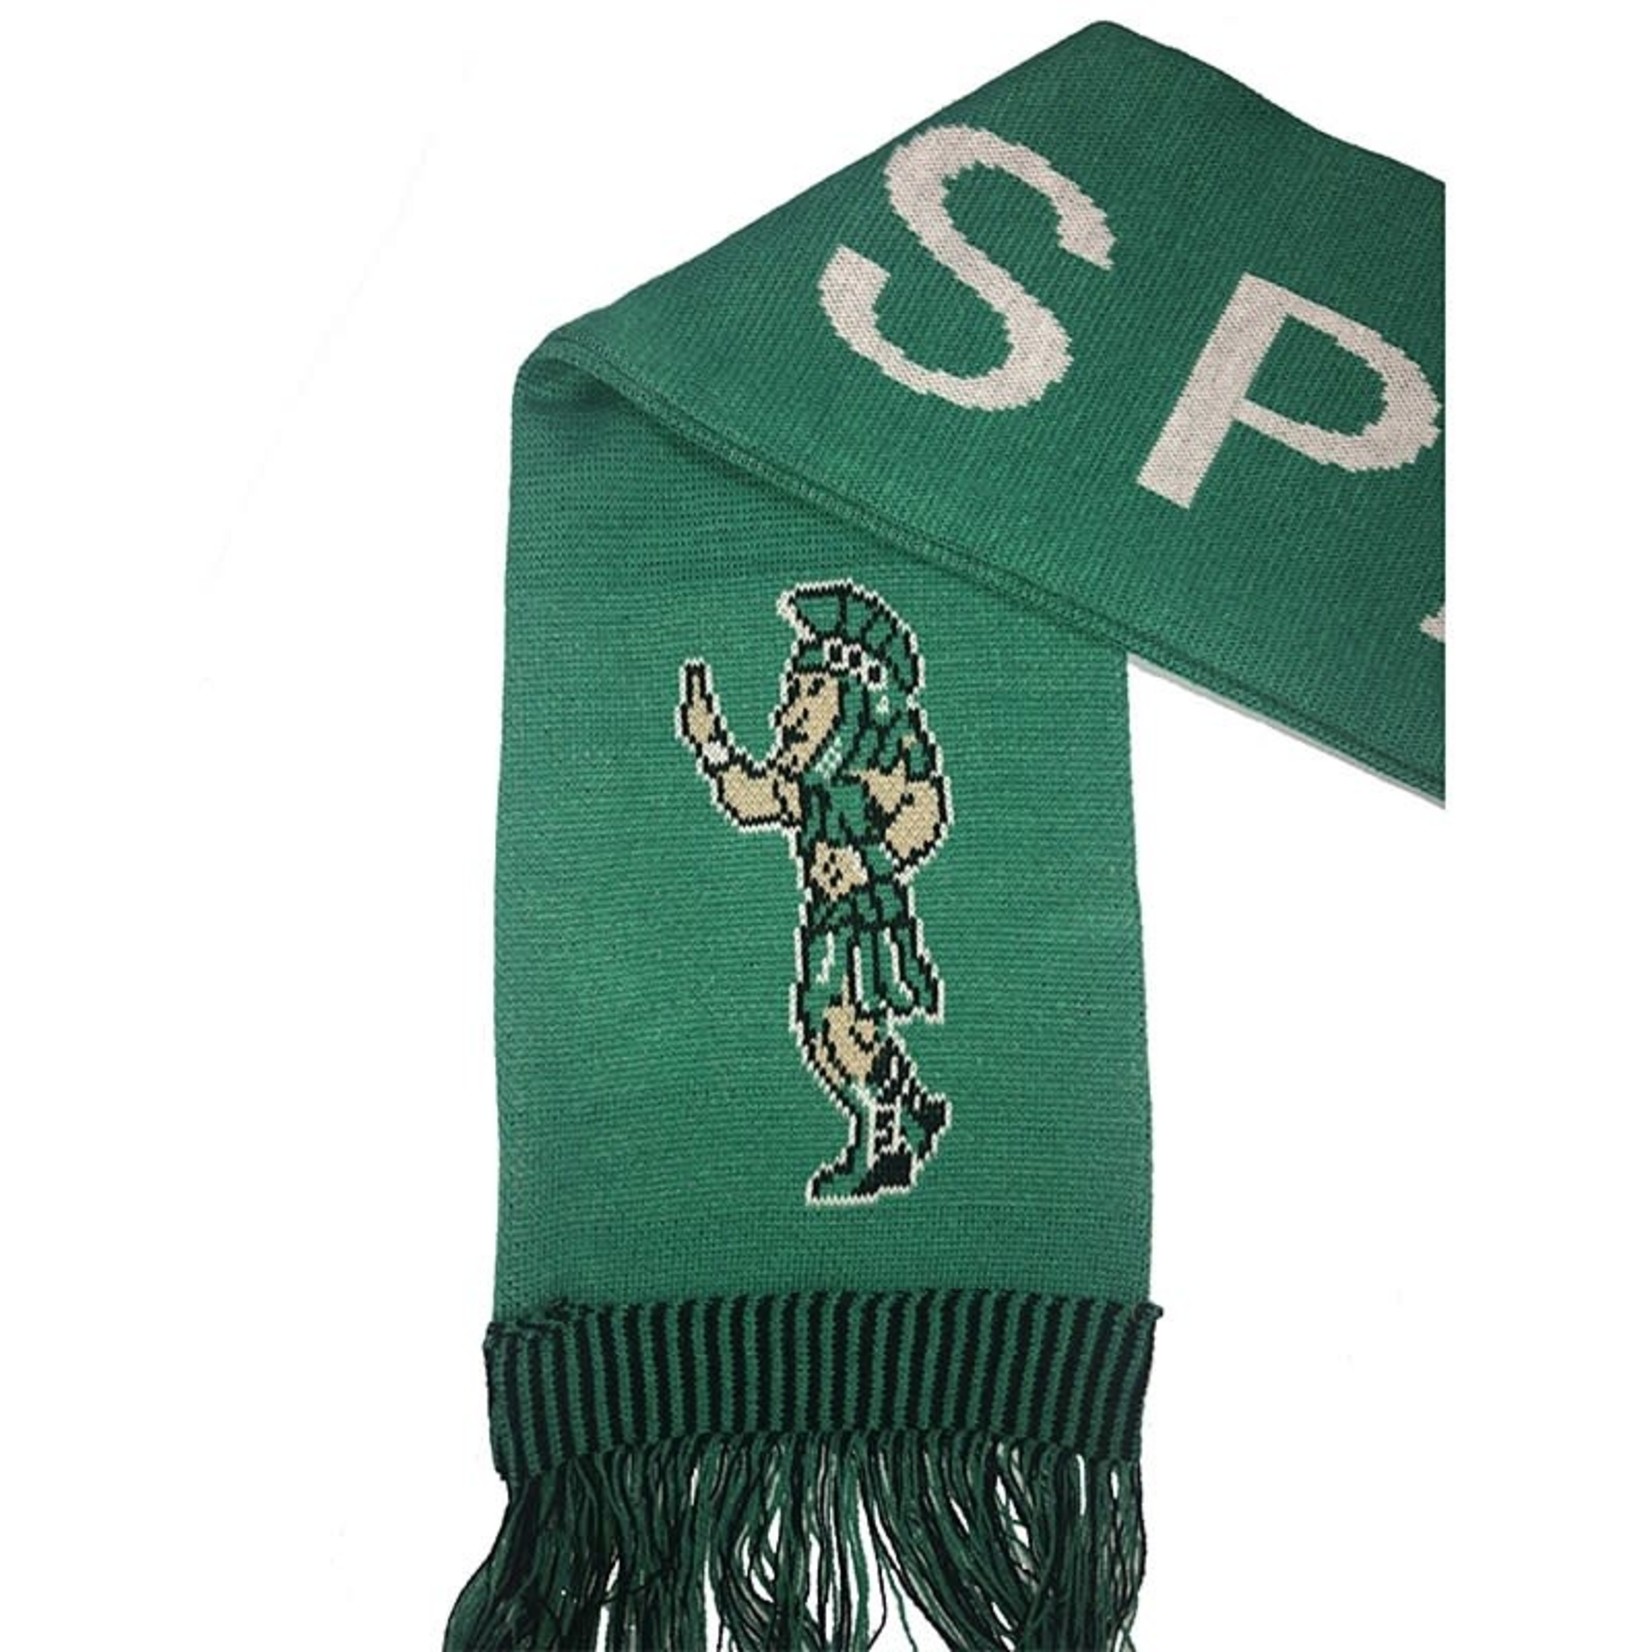 Donegal Bay NCAA Michigan State University Scarf - Sparty Knit Scarf